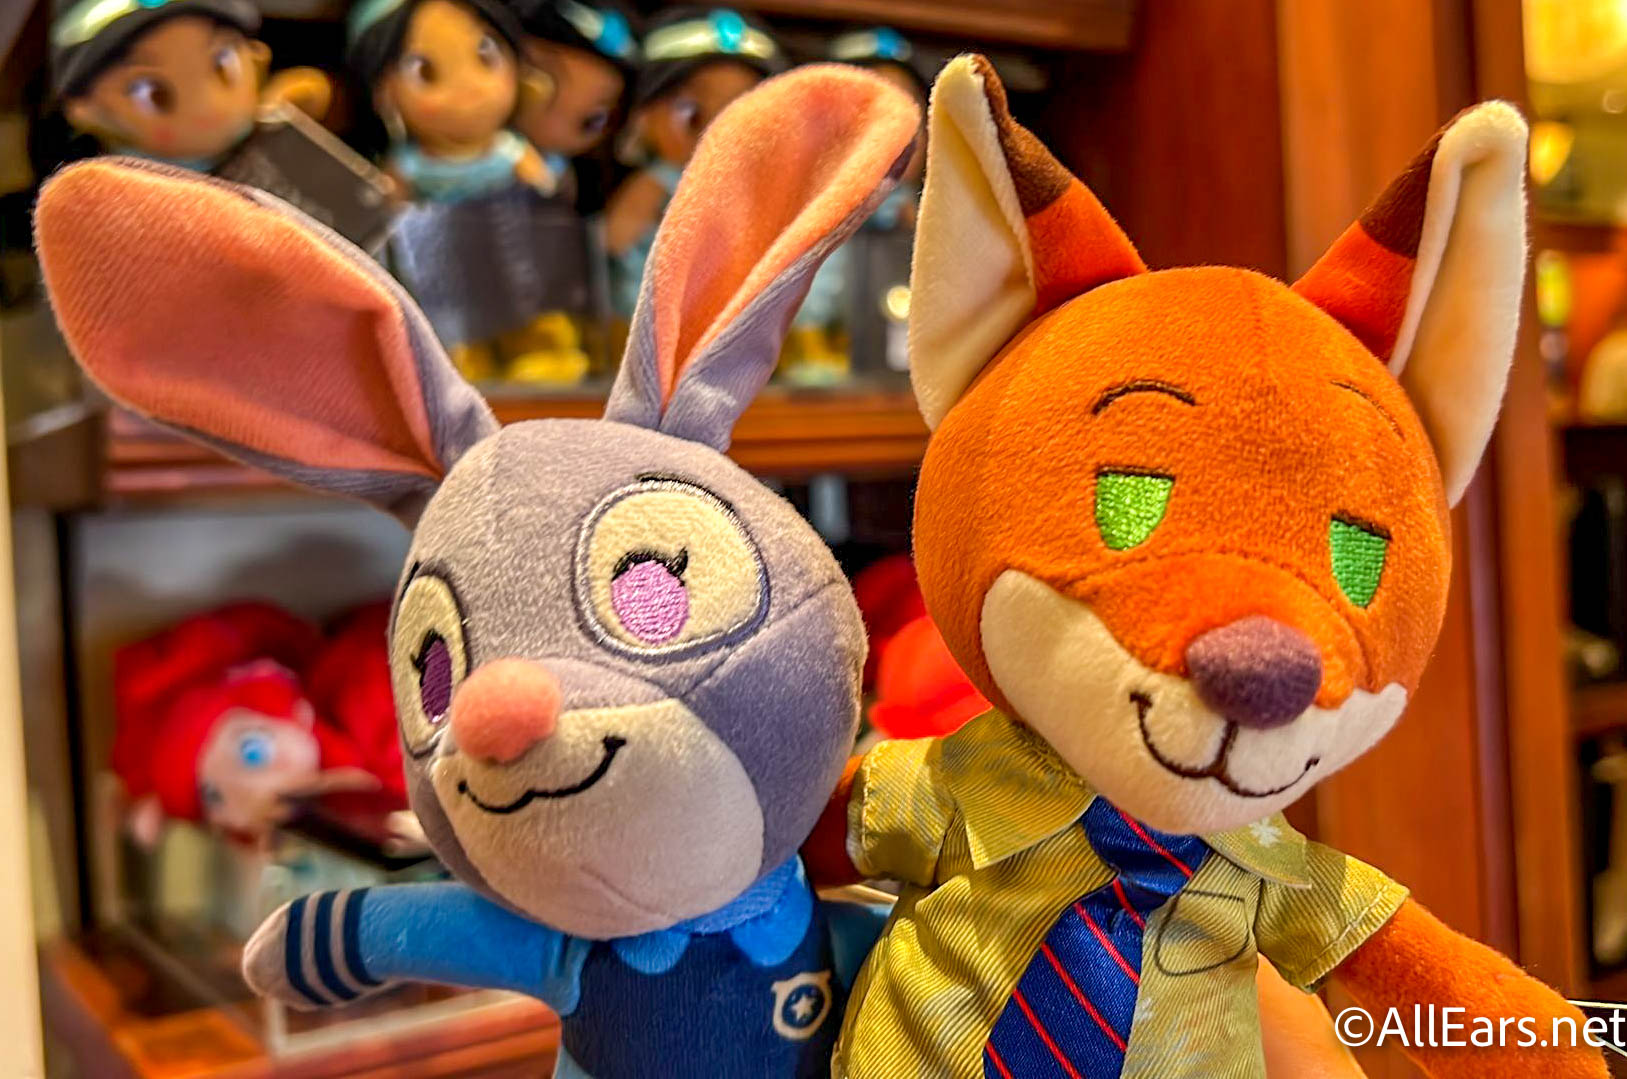 https://allears.net/wp-content/uploads/2022/04/2022-wdw-wdw-mk-magic-kingdom-disney-nuimos-nick-judy-zootopia-plush-collectibles-price-increase-8.jpg